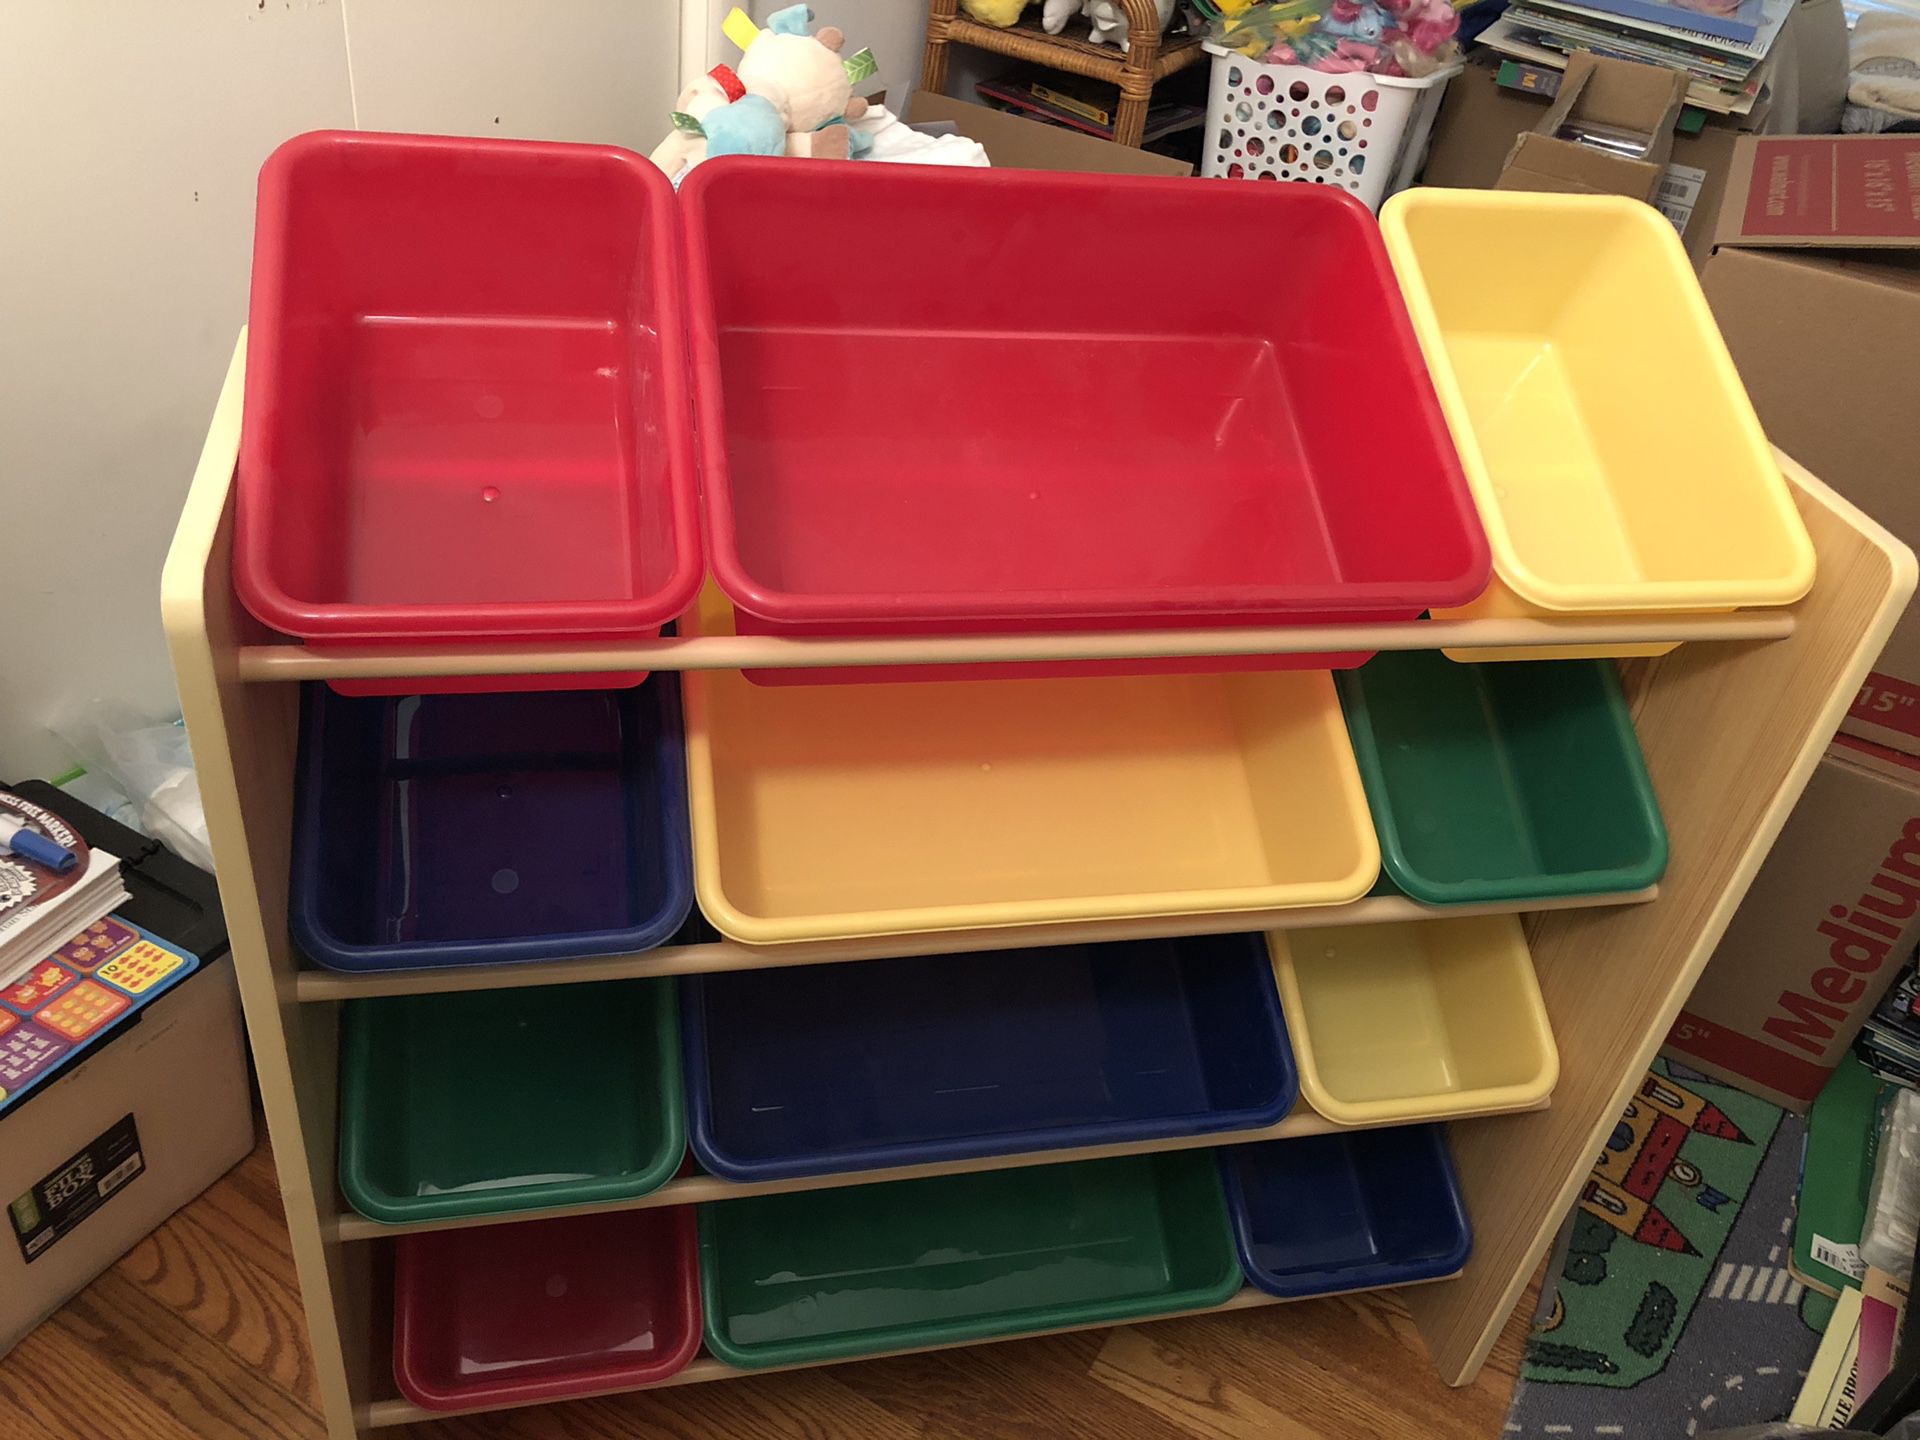 Large toy organizer with bins